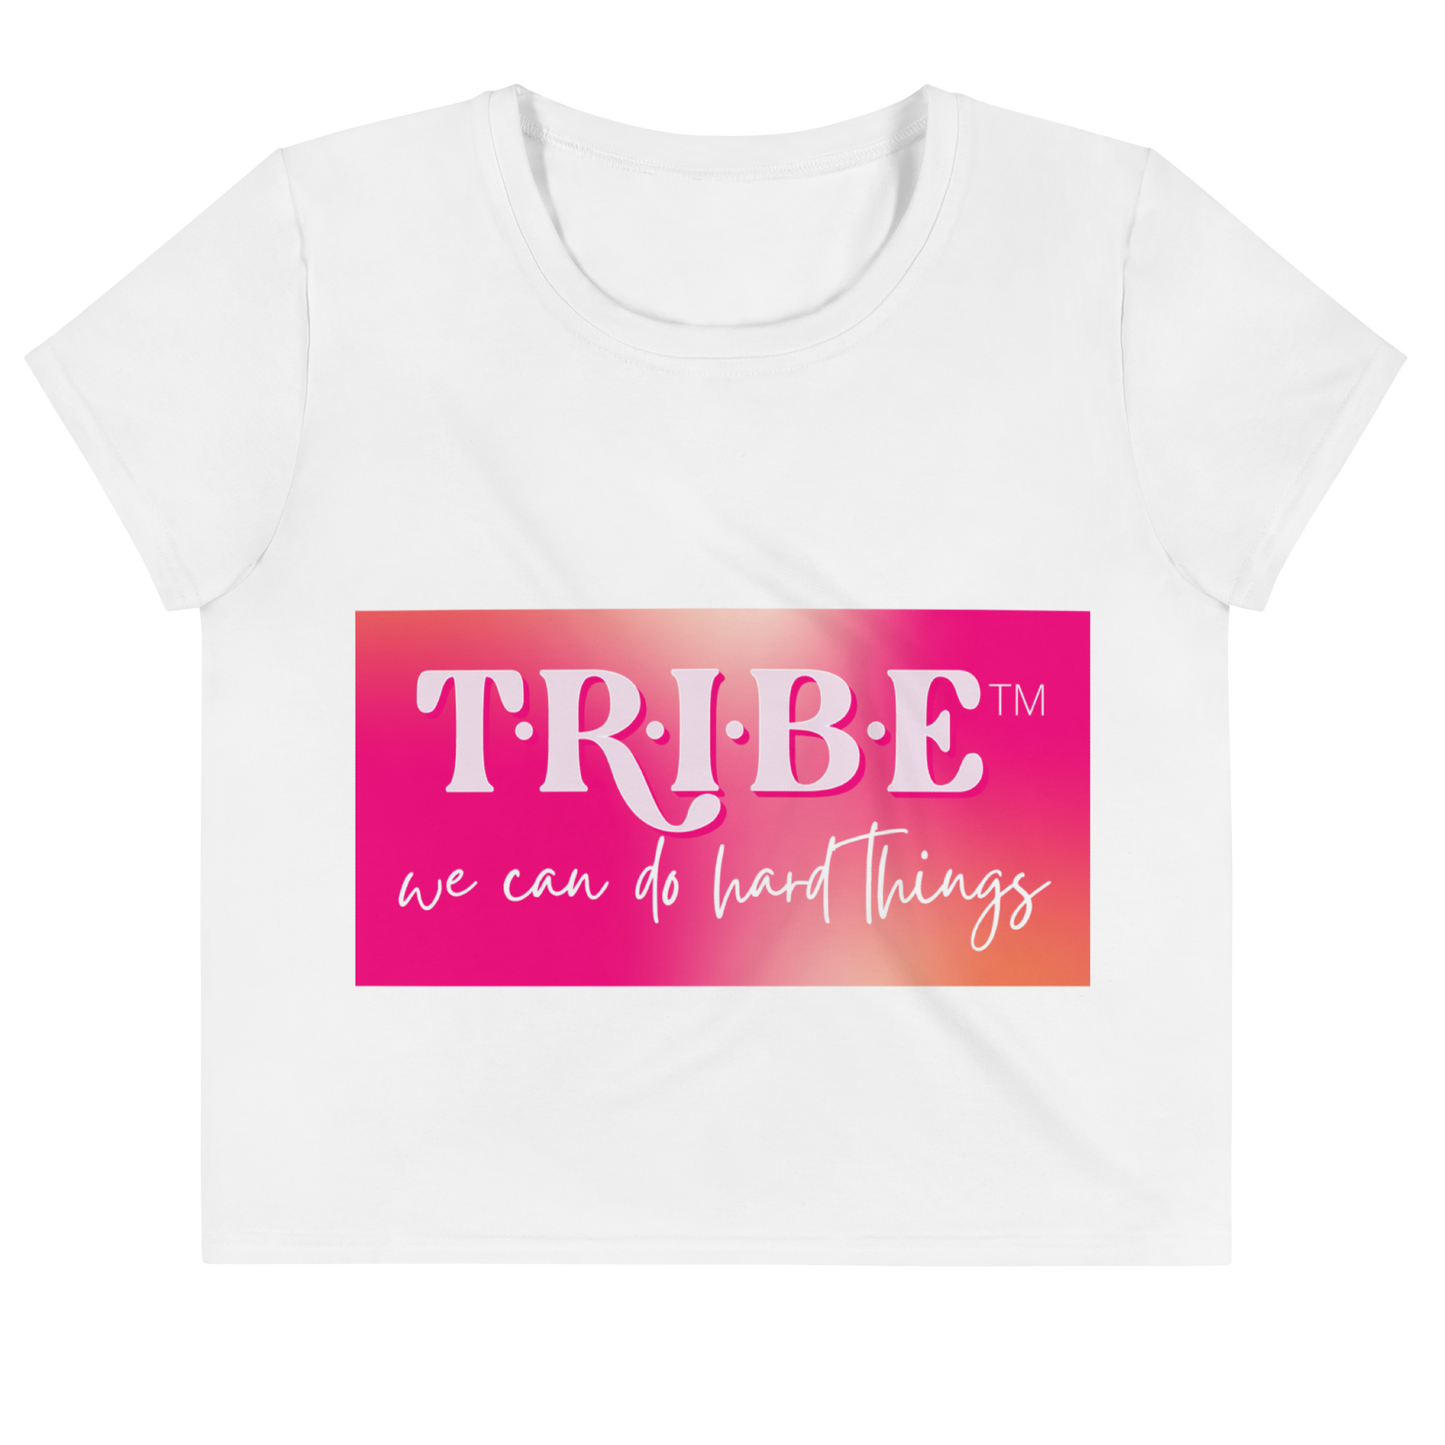 TRIBE Crop Top T-SHIRT - WE CAN DO HARD THINGS